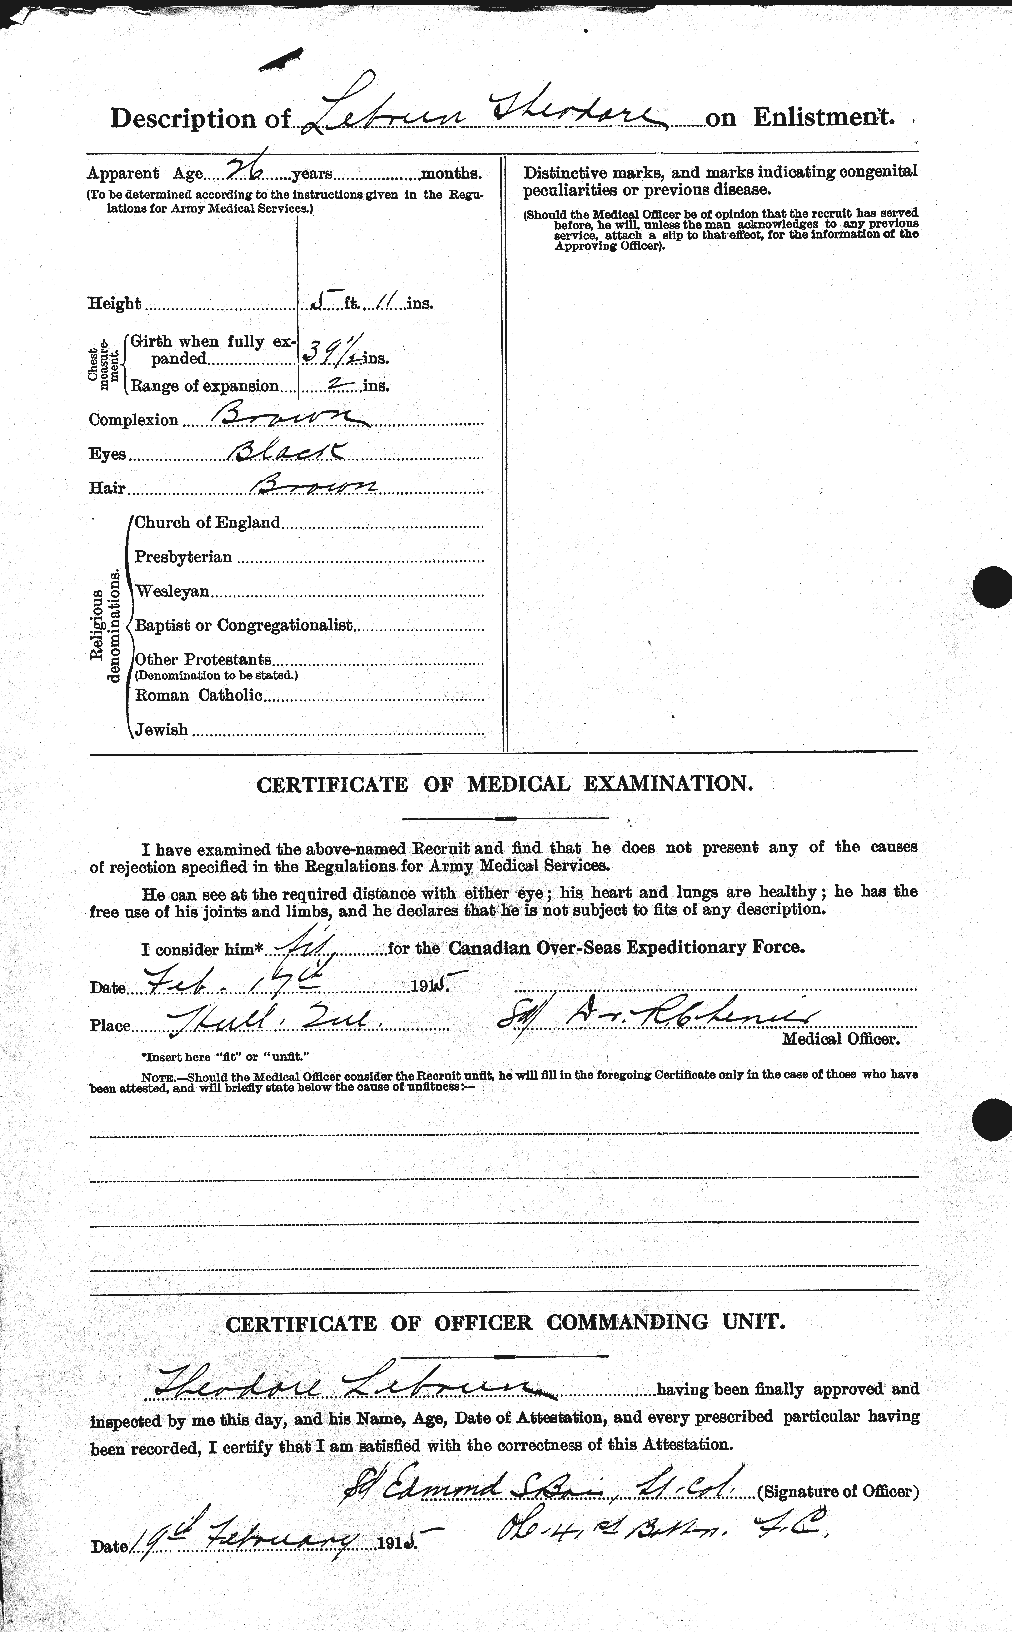 Personnel Records of the First World War - CEF 461590b